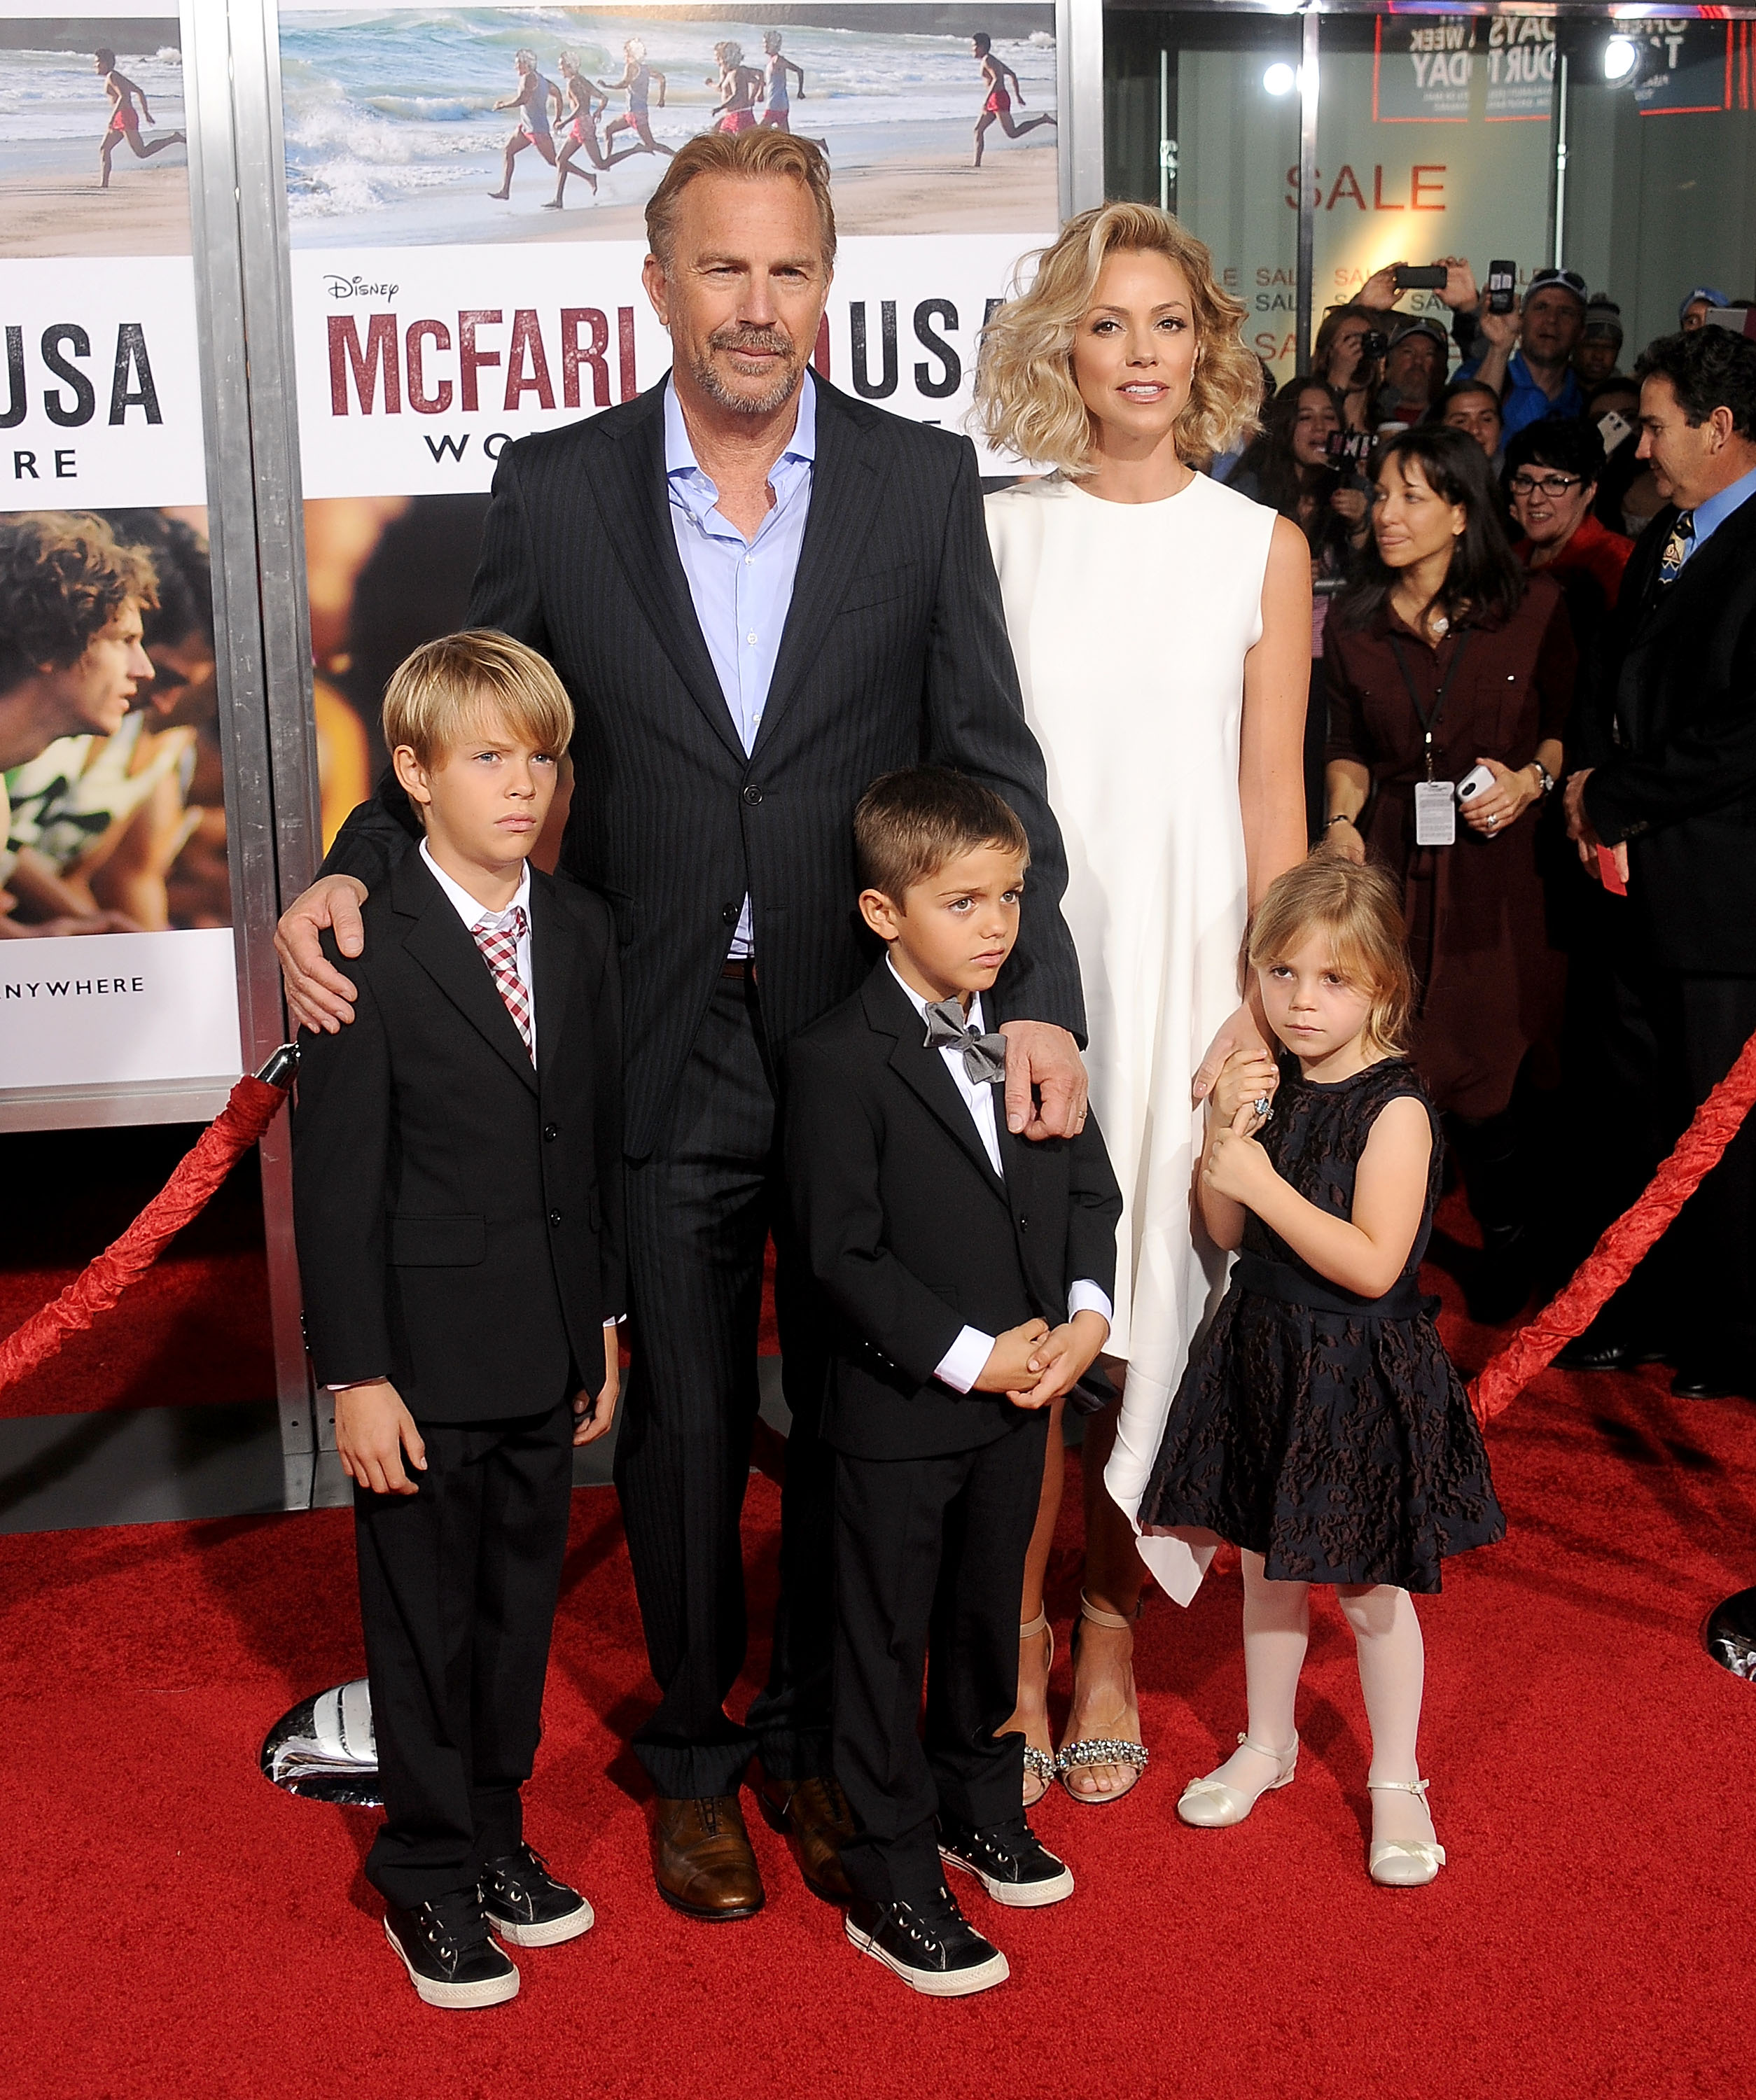 Kevin Costner, Christine Baumgartner, Cayden Wyatt Costner, Hayes Logan Costner, and Grace Avery Costner pose as they arrive at the World Premiere of Disney's "McFarland, USA" at the El Capitan Theatre on February 9, 2015, in Hollywood, California | Source: Getty Images